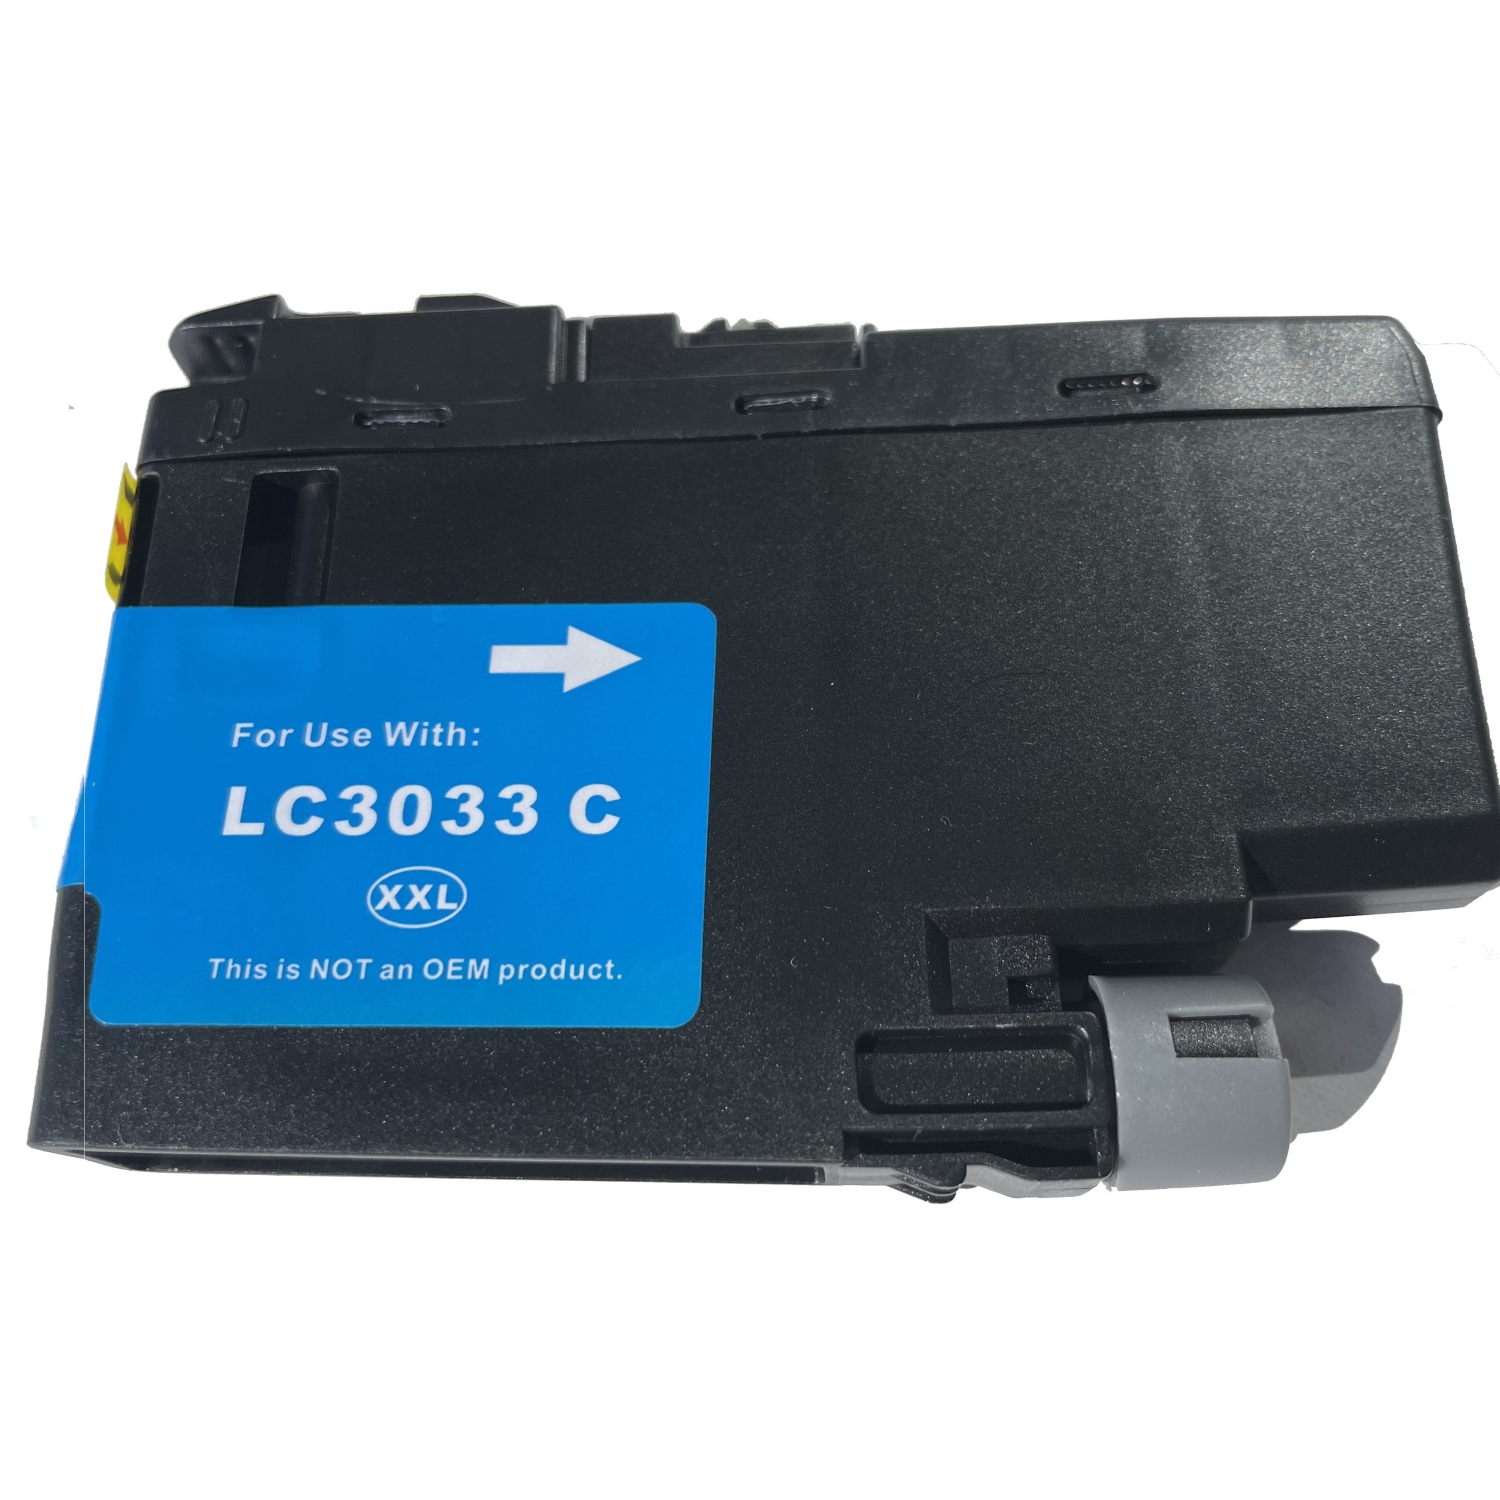 TONER4U - I Cyan Ink Cartridge LC3033 XXL Compatible Extra High Yield for Brother LC3033 MFC-J805DW, MFC-J995DW, MFC-J995DWX